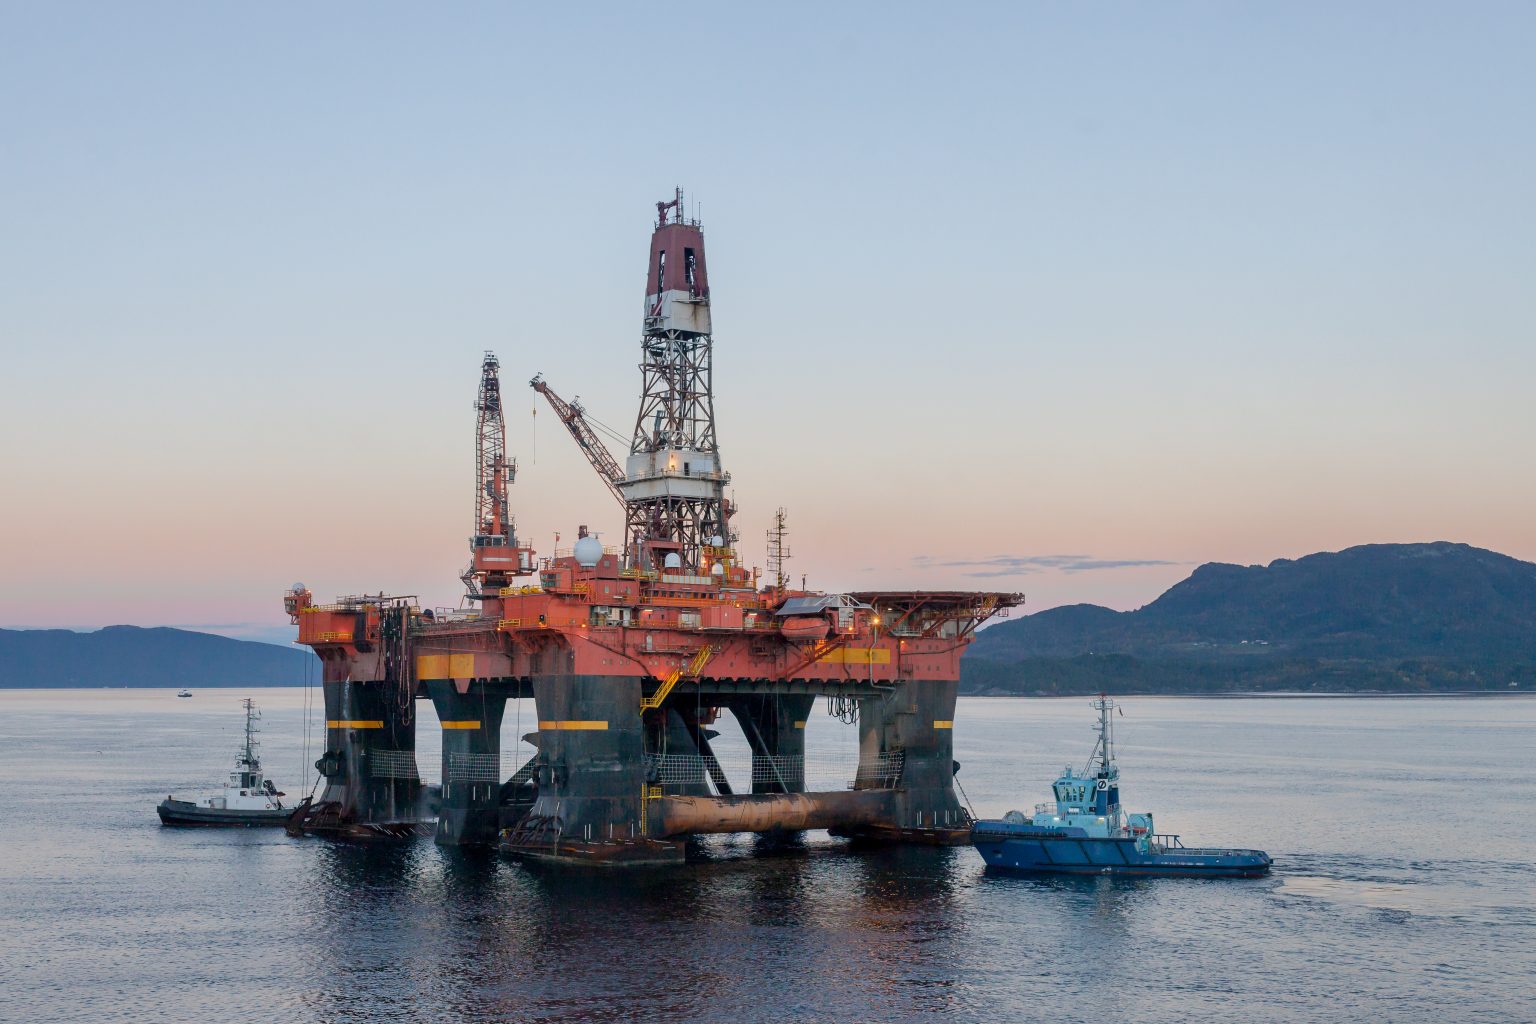 OELEN NORWAY - 2014 OCTOBER 16. The semi-submersible drilling rig West Alpha inside the Norwegian fjord in the morning with tug boats.